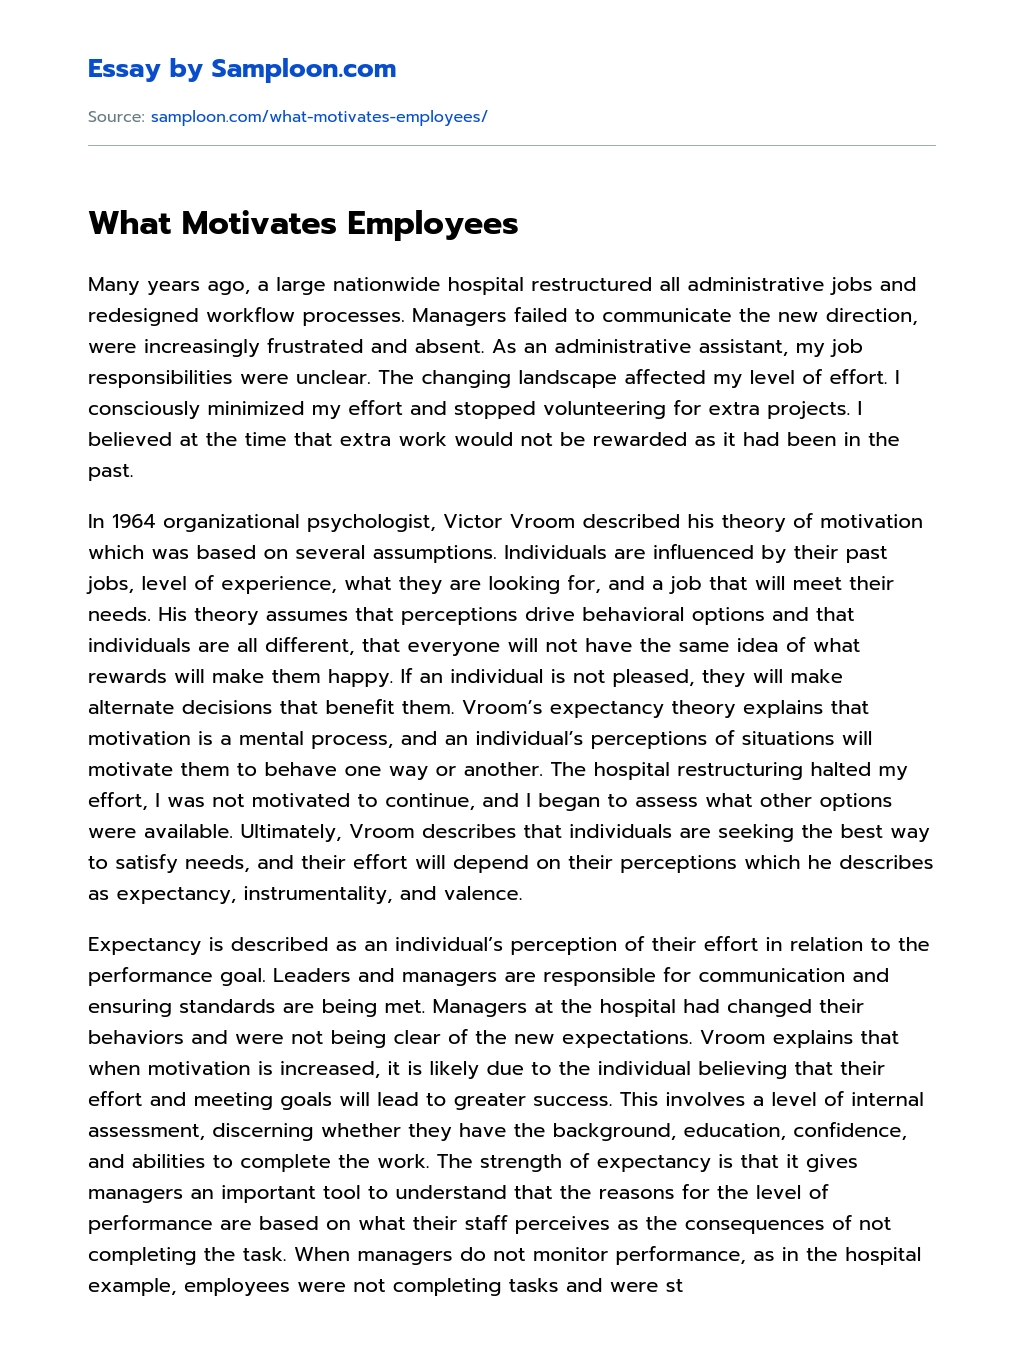 What Motivates Employees essay